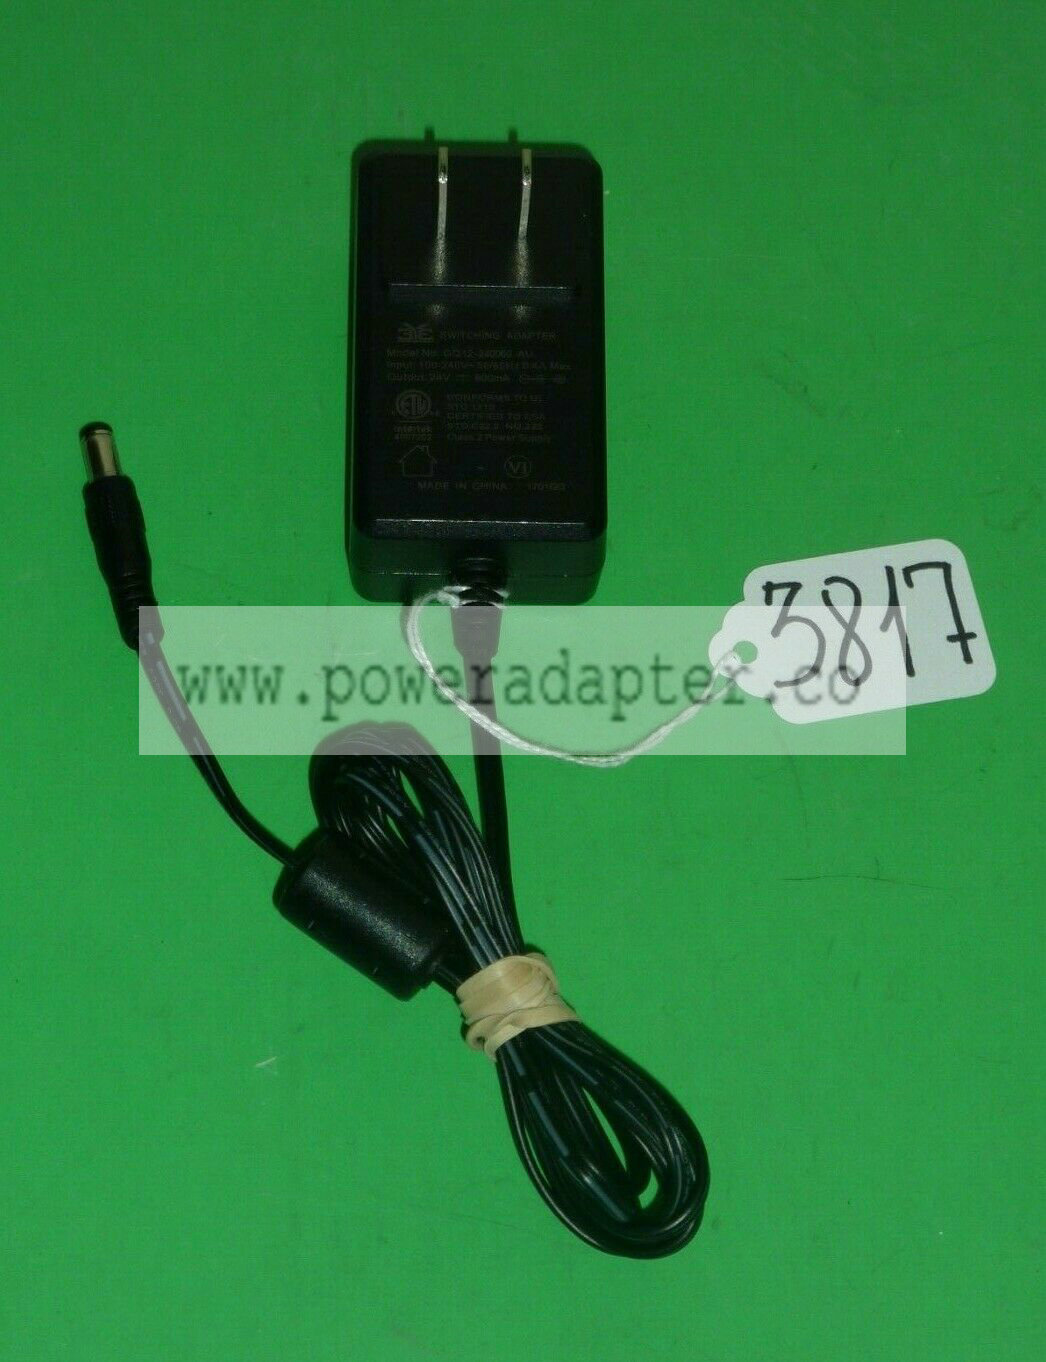 3YE Switching Power Supply Adapter Model GQ12-240060-AU 24V Brand: 3YE MPN: Does Not Apply Model: GQ12-240060-AU - Click Image to Close